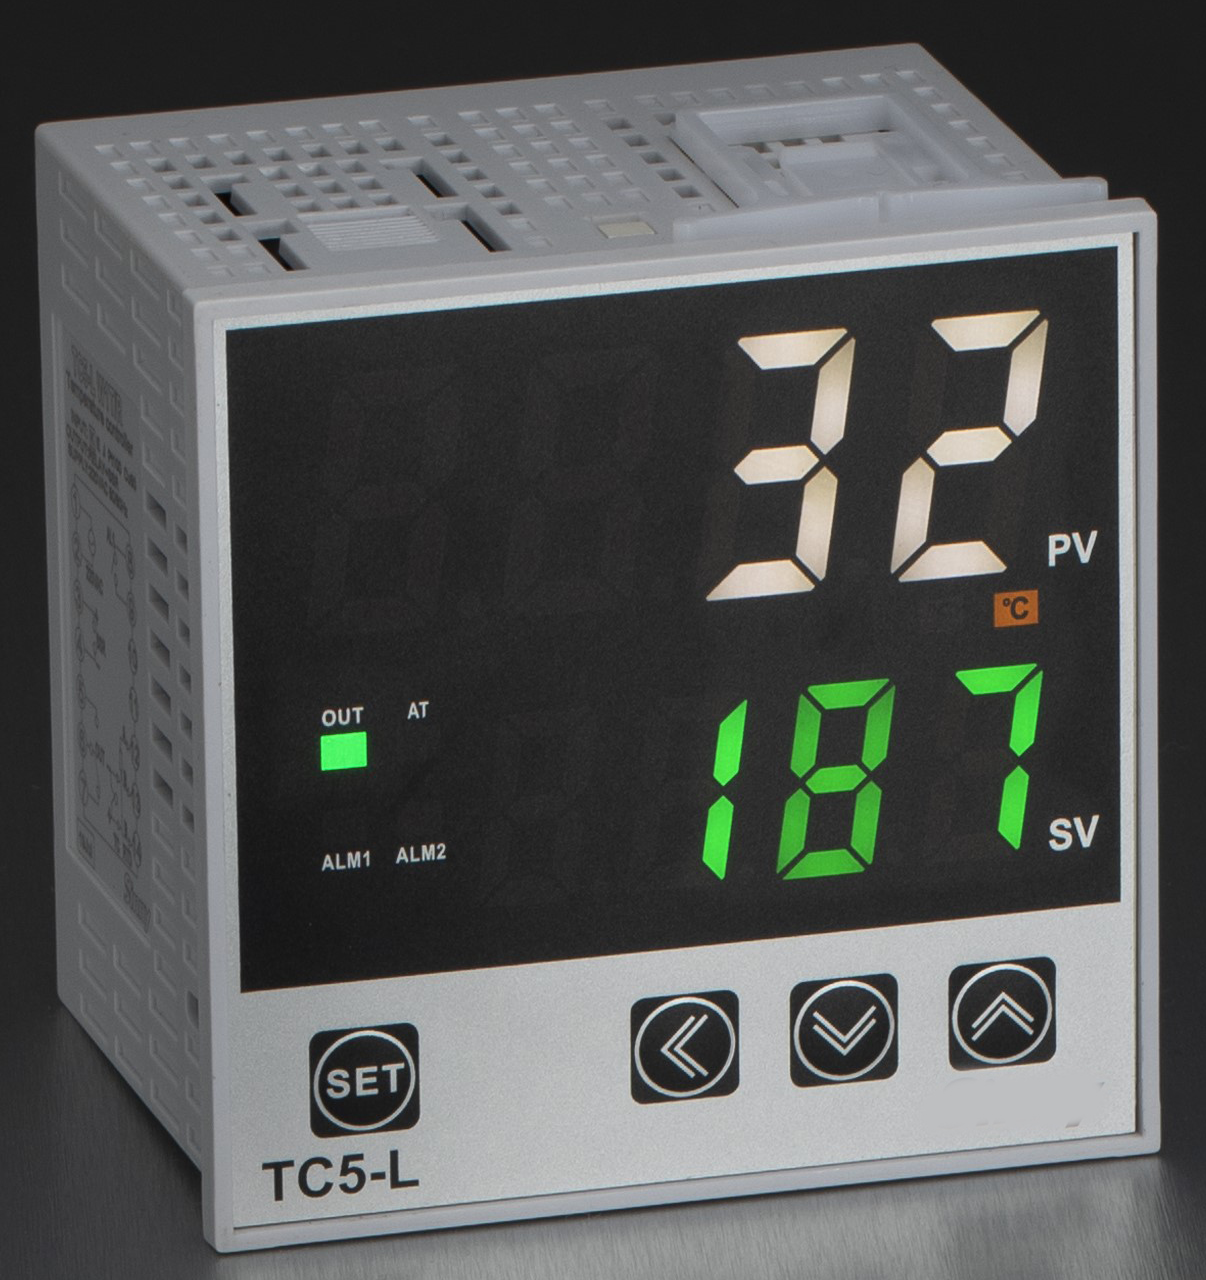 TC5-L-W-2-G-2,  PID Controller, 100-240VAC with 2 3 Amp Relay Alarms, K,E,J,N,T,S,R,B Thermocouple, Linear Current/Voltage and PT100/Cu20 RTD Input, 96x96mm, Relay + 12VDC Output